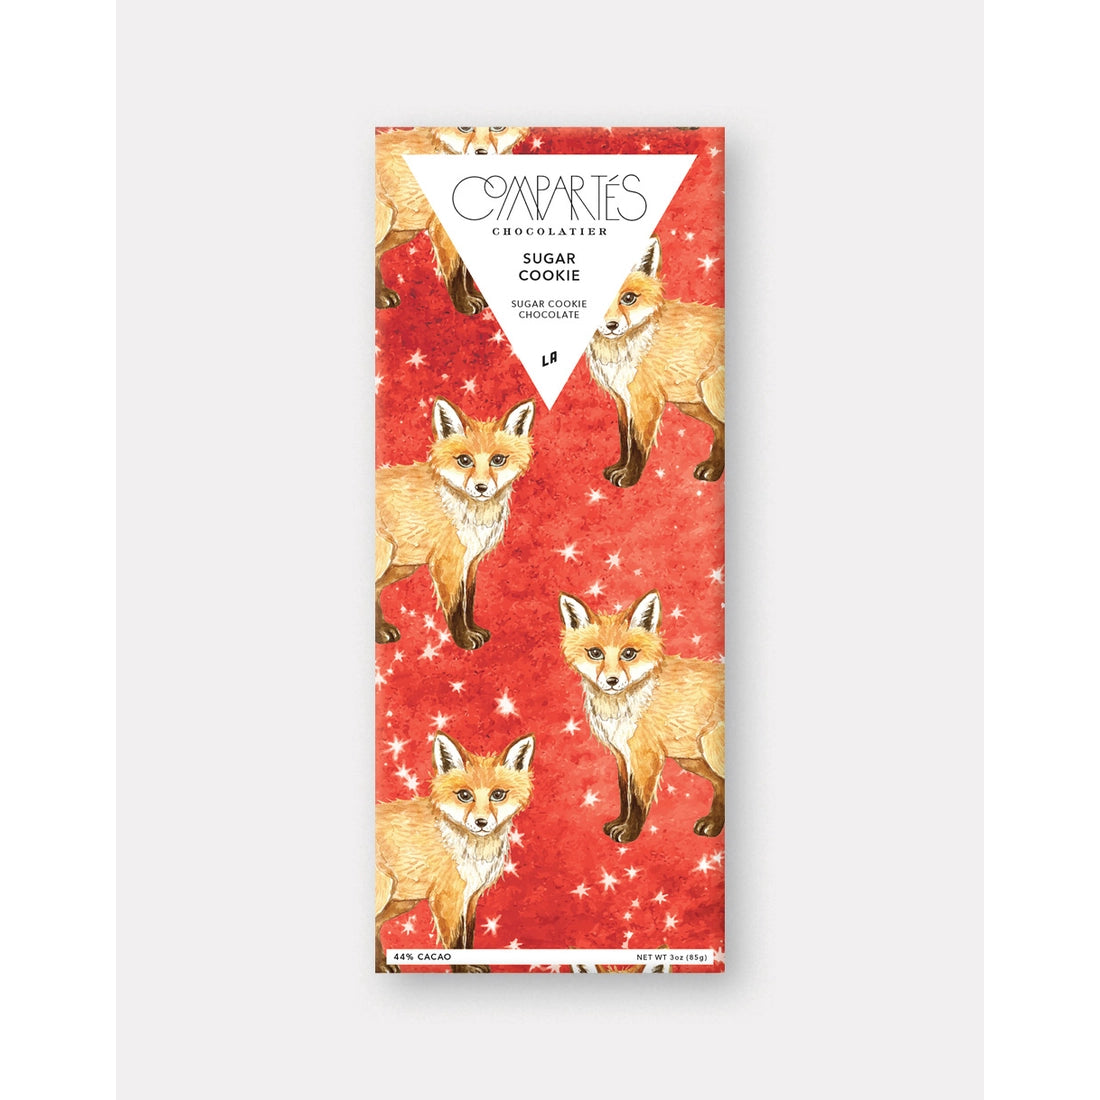 Compartés Chocolatier Assorted White Chocolate Bars